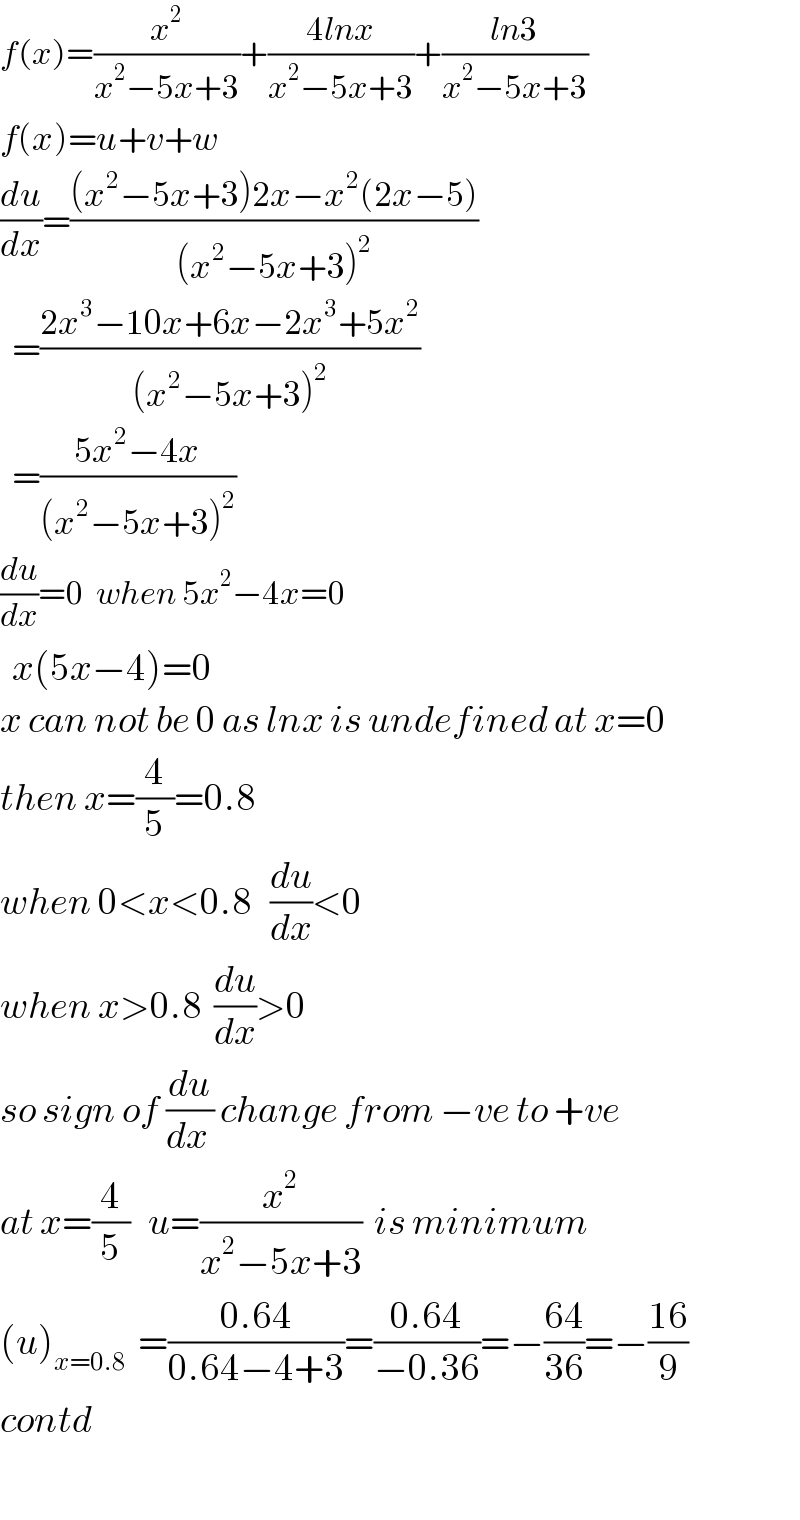 f(x)=(x^2 /(x^2 −5x+3))+((4lnx)/(x^2 −5x+3))+((ln3)/(x^2 −5x+3))  f(x)=u+v+w  (du/dx)=(((x^2 −5x+3)2x−x^2 (2x−5))/((x^2 −5x+3)^2 ))    =((2x^3 −10x+6x−2x^3 +5x^2 )/((x^2 −5x+3)^2 ))    =((5x^2 −4x)/((x^2 −5x+3)^2 ))  (du/dx)=0  when 5x^2 −4x=0    x(5x−4)=0   x can not be 0 as lnx is undefined at x=0  then x=(4/5)=0.8  when 0<x<0.8   (du/dx)<0     when x>0.8  (du/dx)>0   so sign of (du/(dx )) change from −ve to +ve  at x=(4/5)   u=(x^2 /(x^2 −5x+3))  is minimum  (u)_(x=0.8)   =((0.64)/(0.64−4+3))=((0.64)/(−0.36))=−((64)/(36))=−((16)/9)  contd    